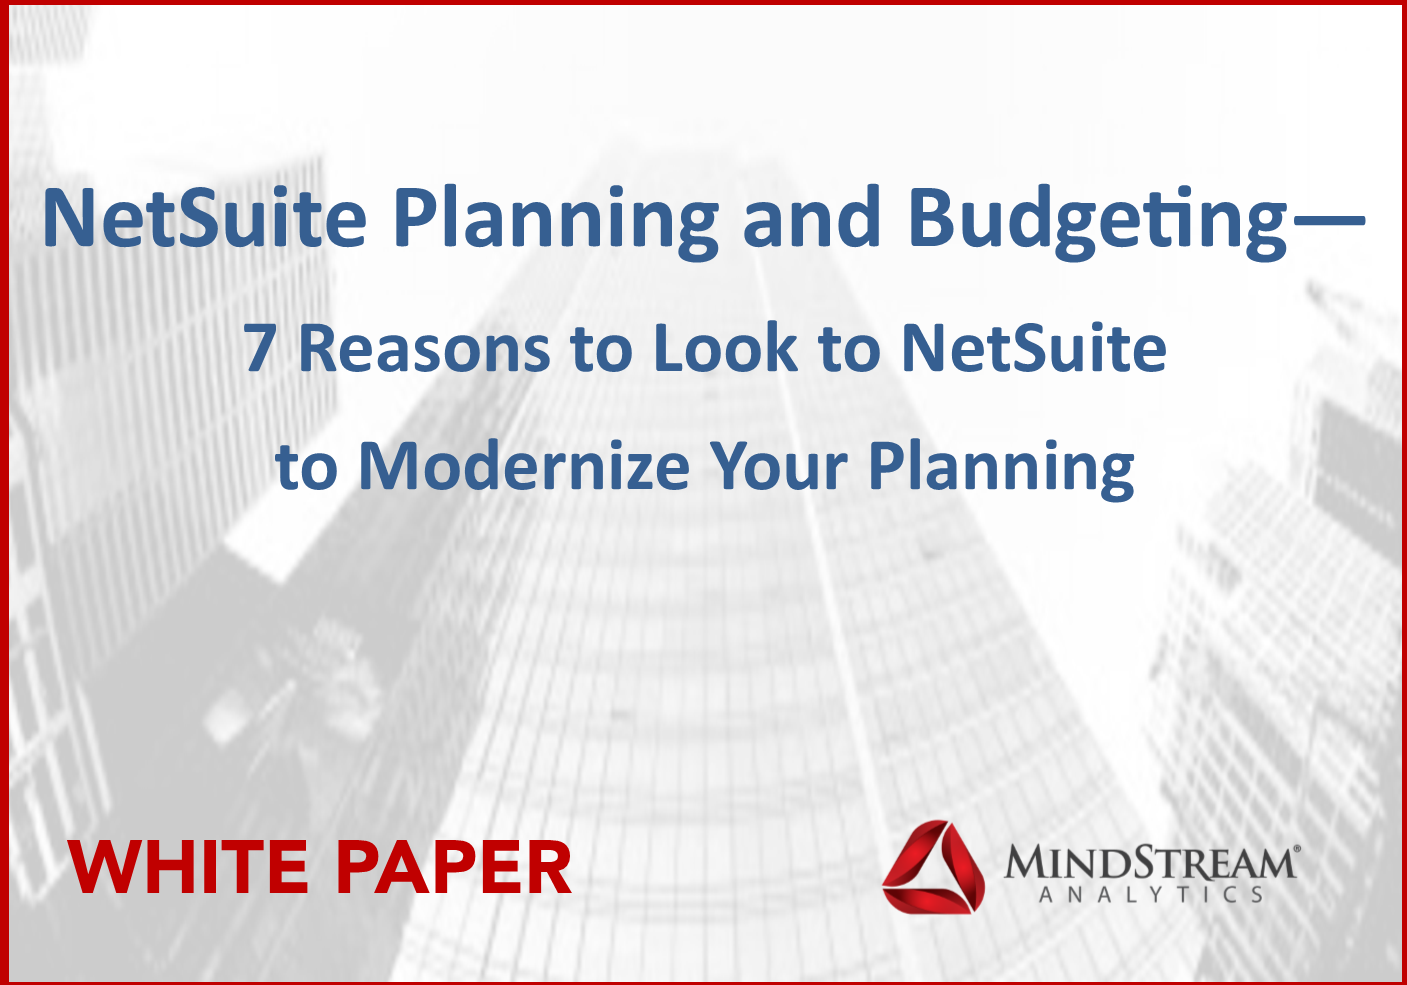 Oracle Netsuite Planning and Budgeting